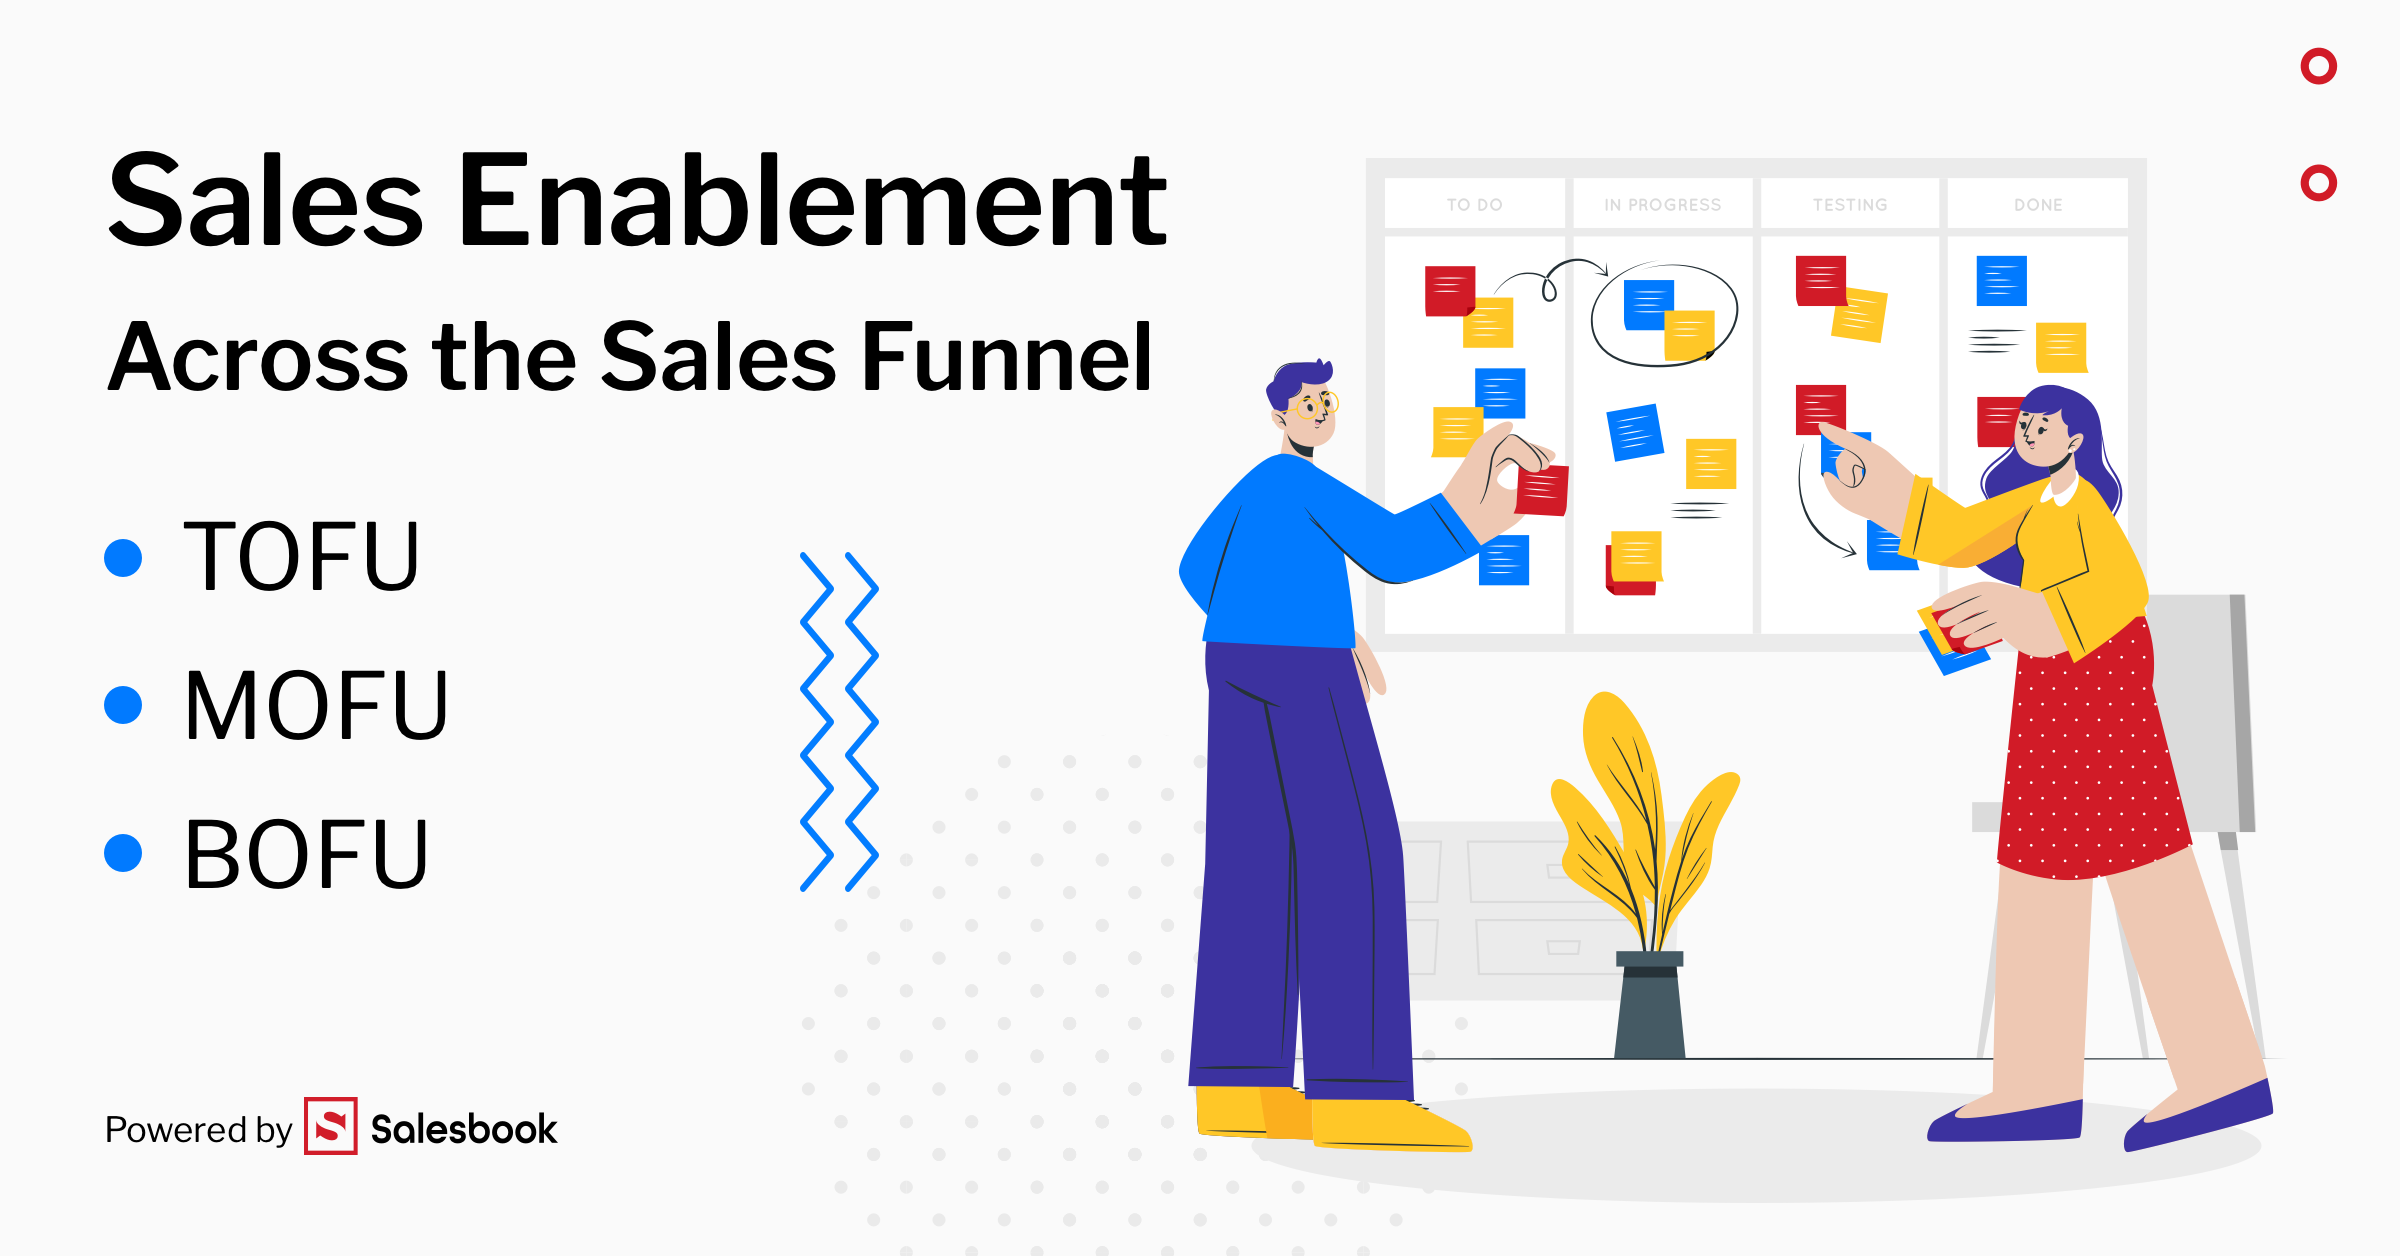 Sales enablement is an essential element of the sales funnel.